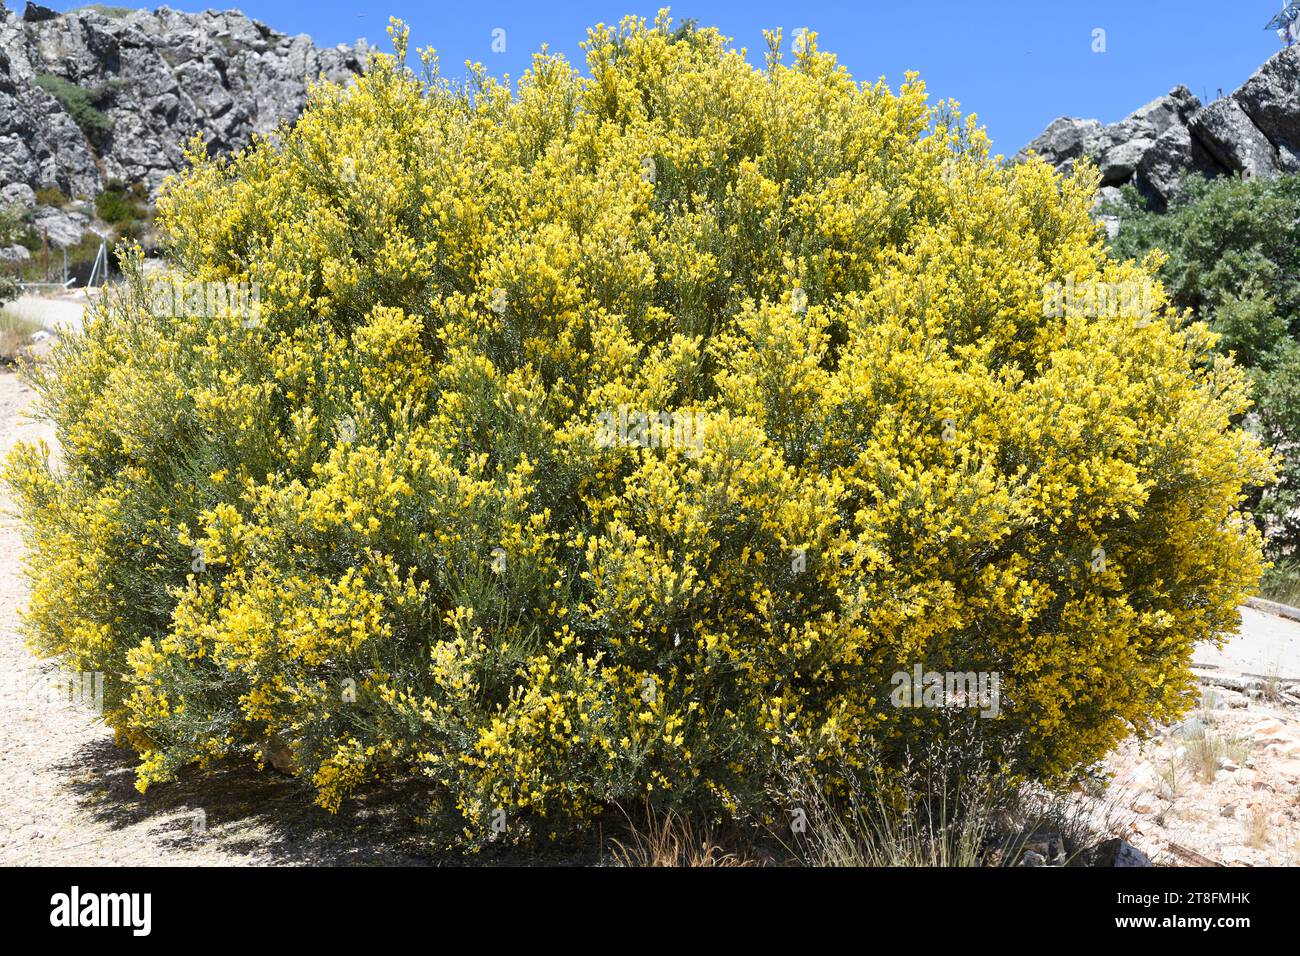 Hiniesta (Genista cinerascens or Genista cinerea cinerascens) is a shrub endemic to west and center Iberian Peninsula. This photo was taken in Pico Vi Stock Photo